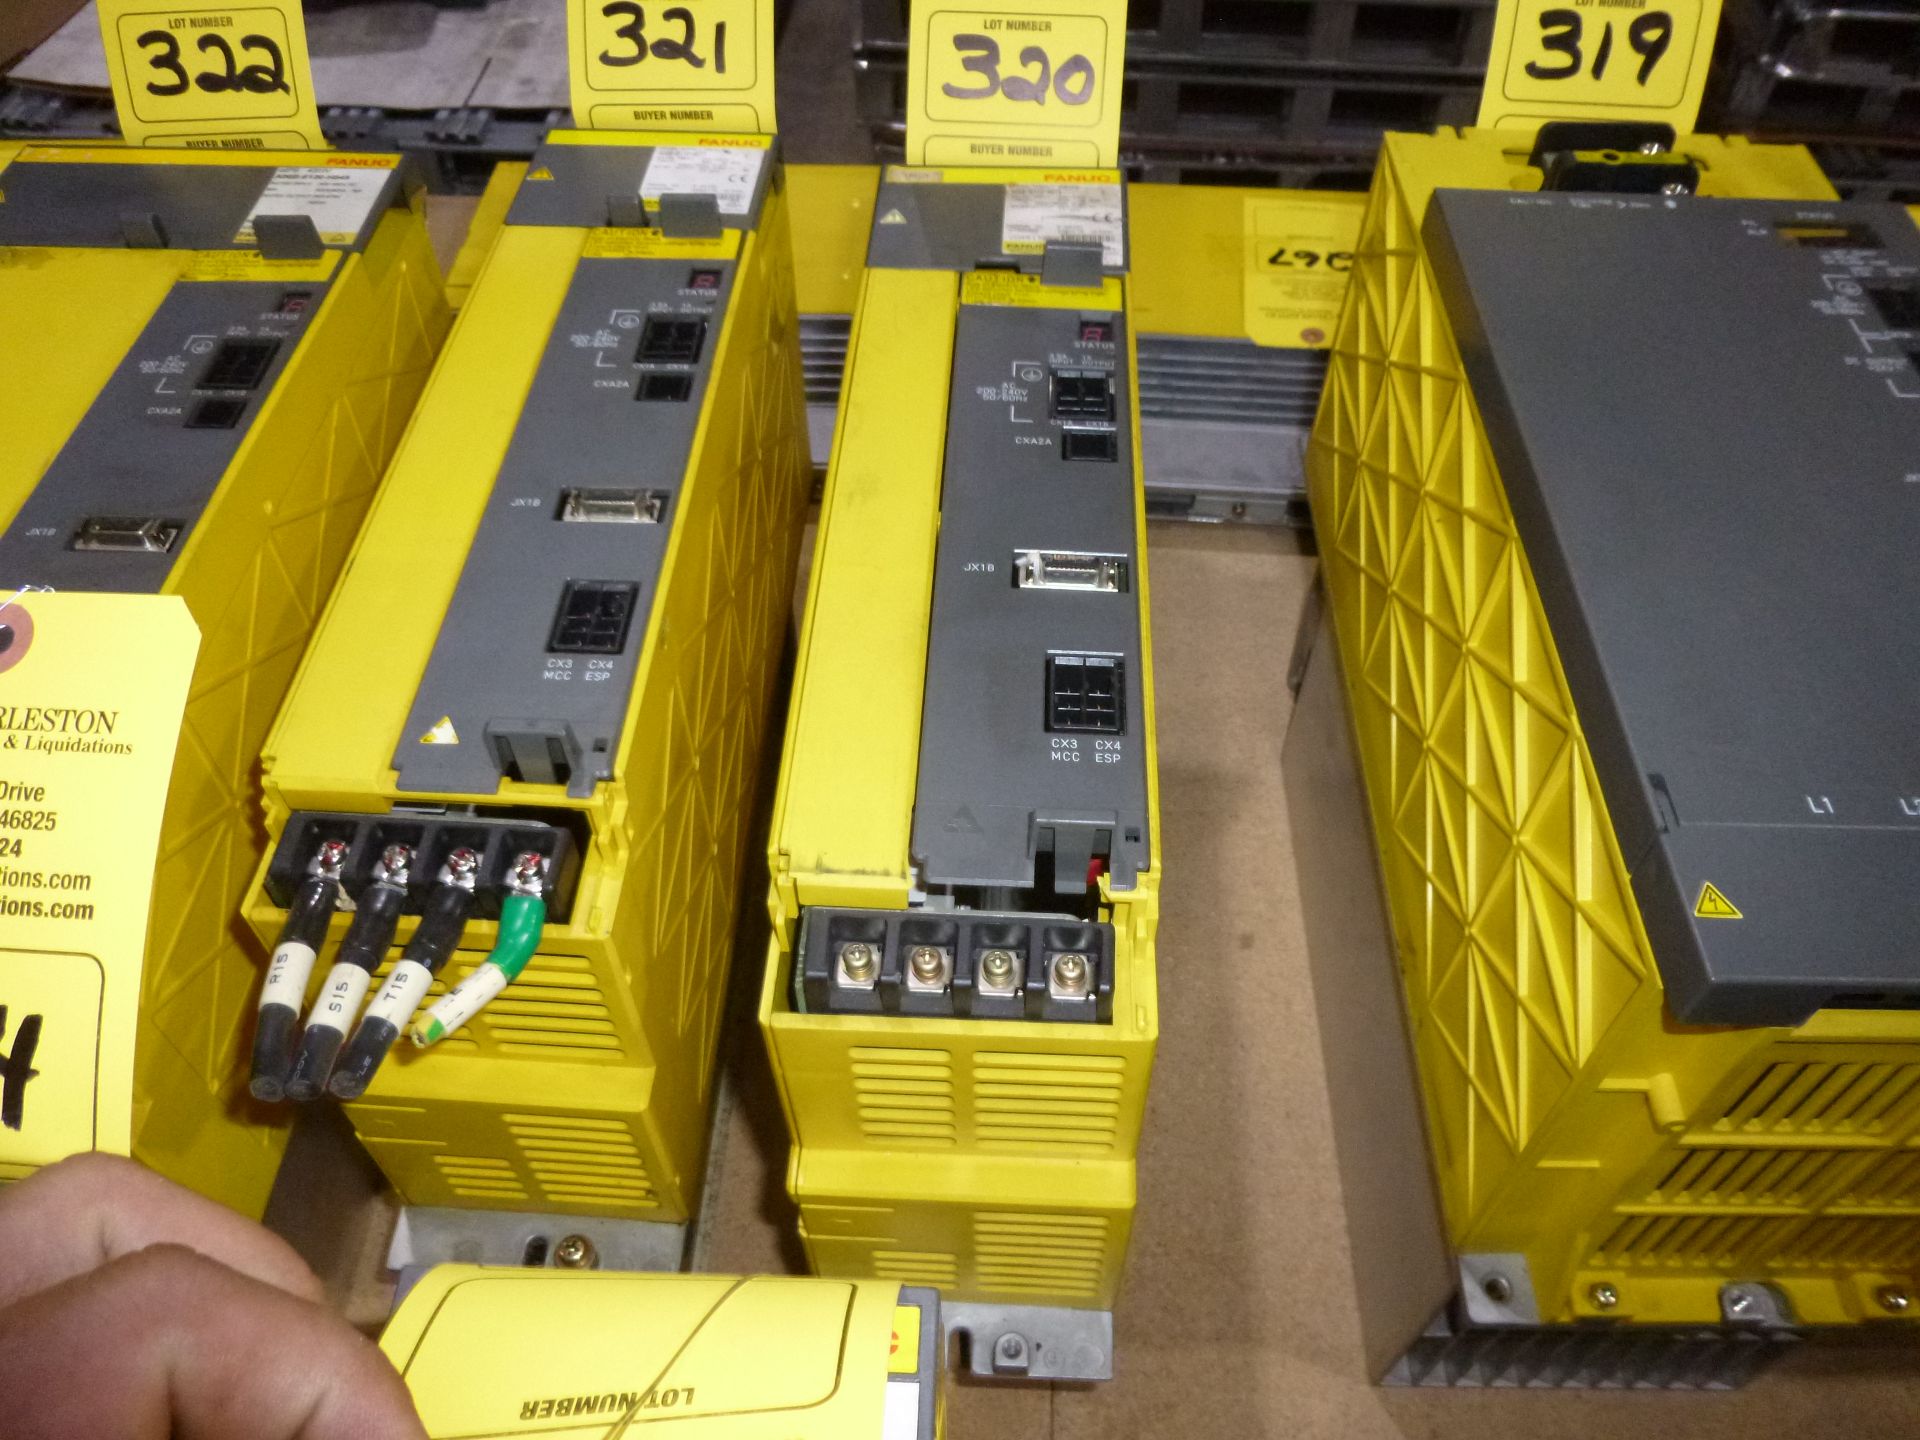 Fanuc power suppy module model A06B-6110-H015, as always with Brolyn LLC auctions, all lots can be